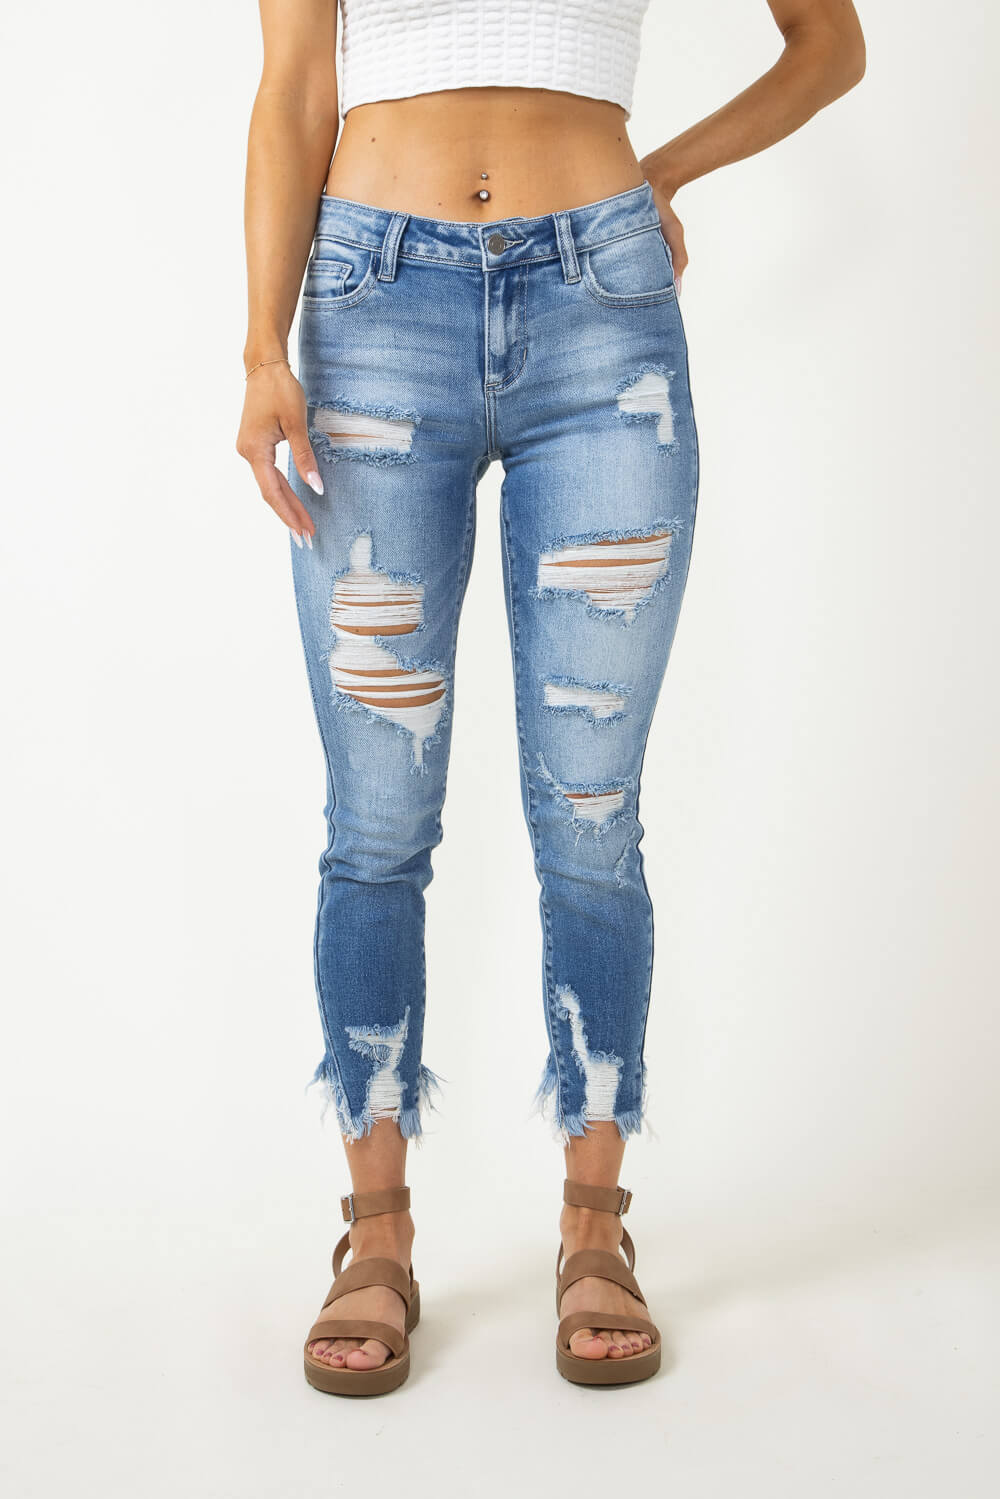 Ripped Jeans, Destroyed Women Jeans